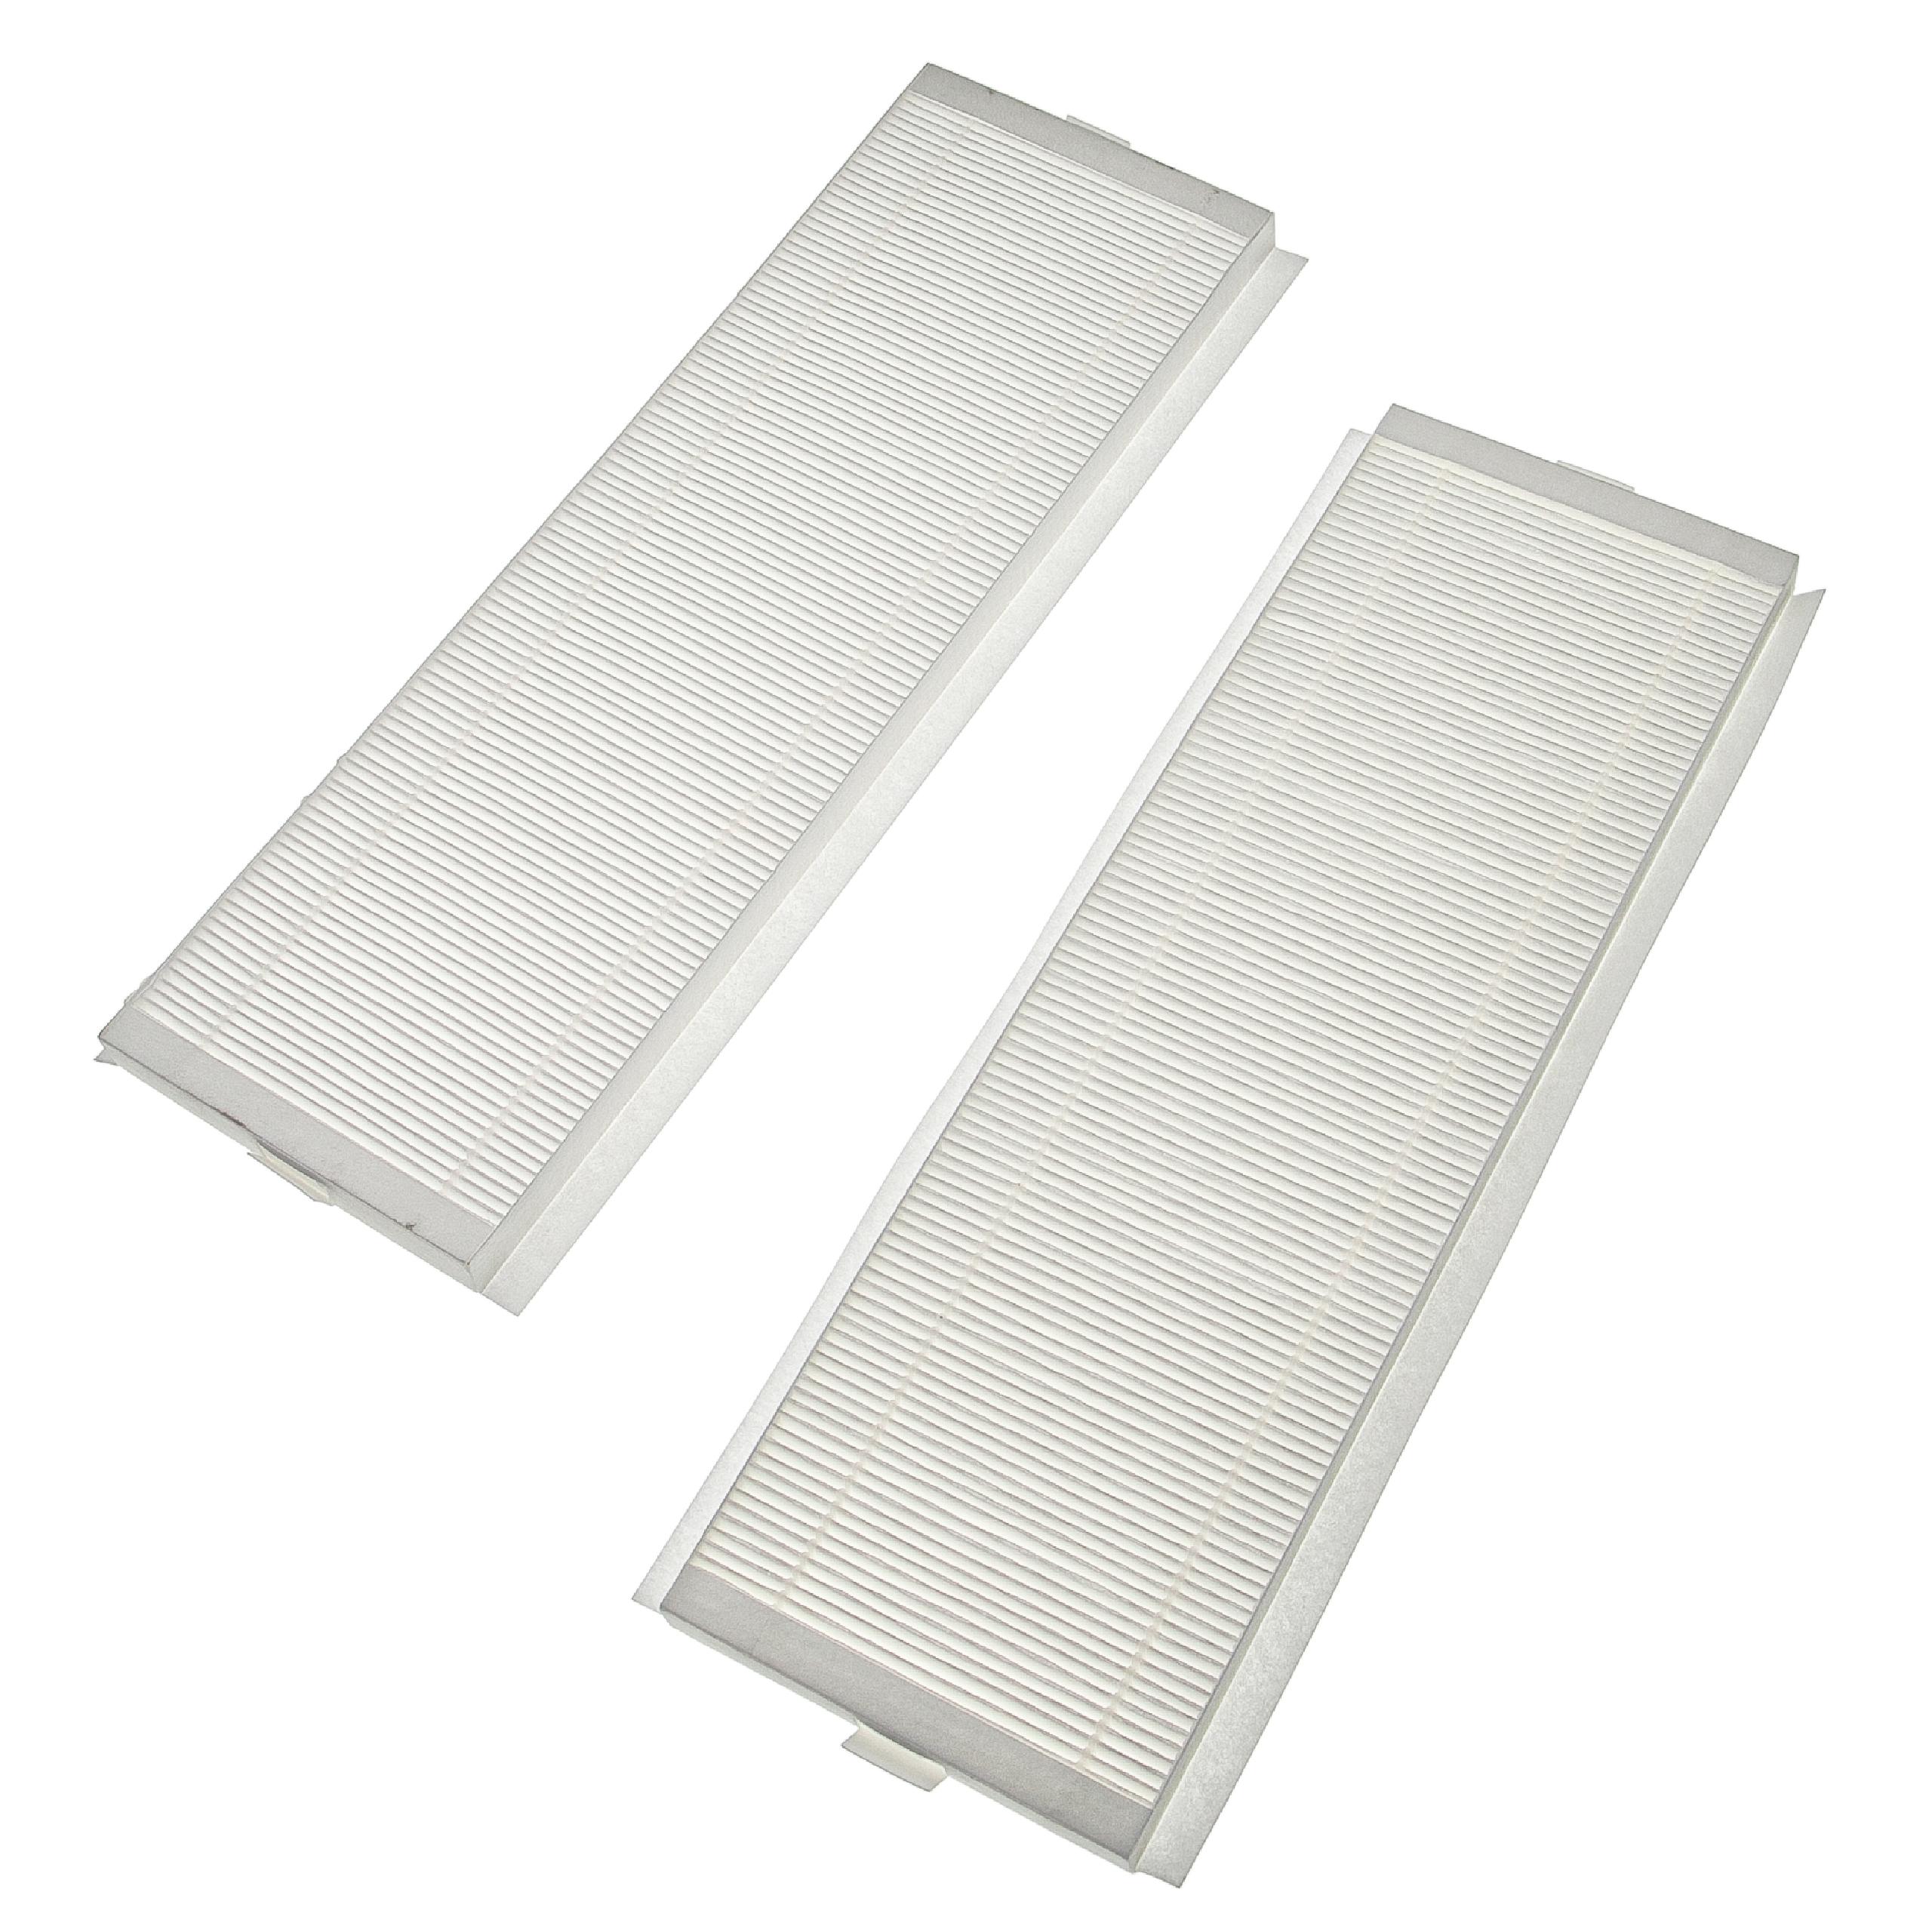 Air Filter Set Replacement for Zehnder 400502013 for Ventilation Devices - G4 / F7